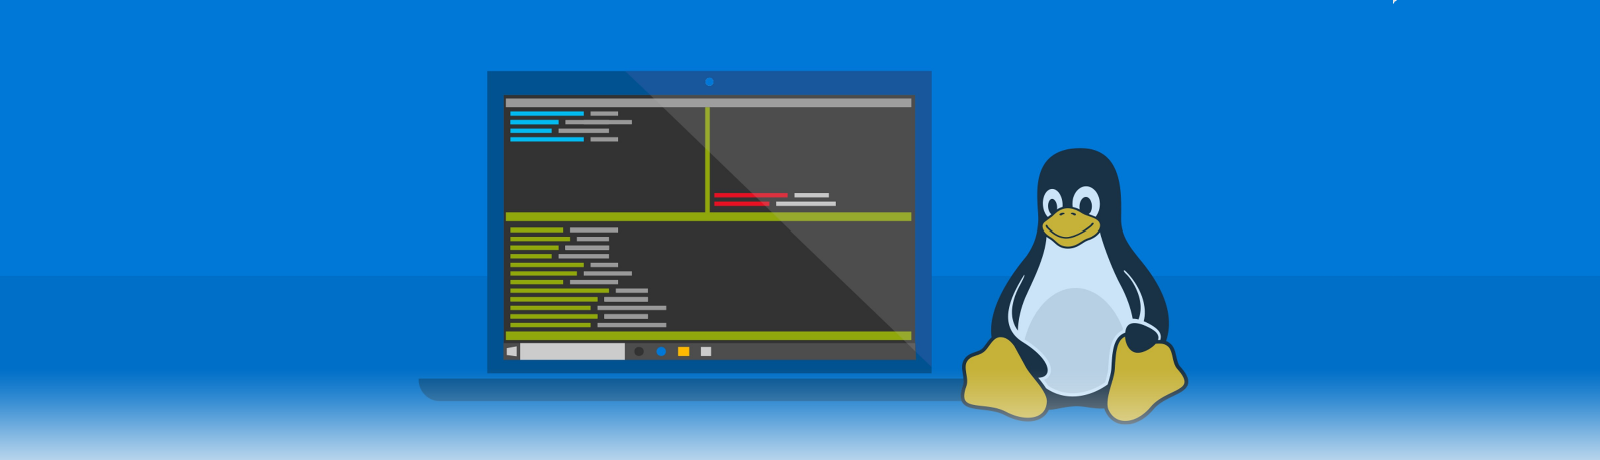 Illustration of a laptop running Windows with the Linux penguin sitting next to it.